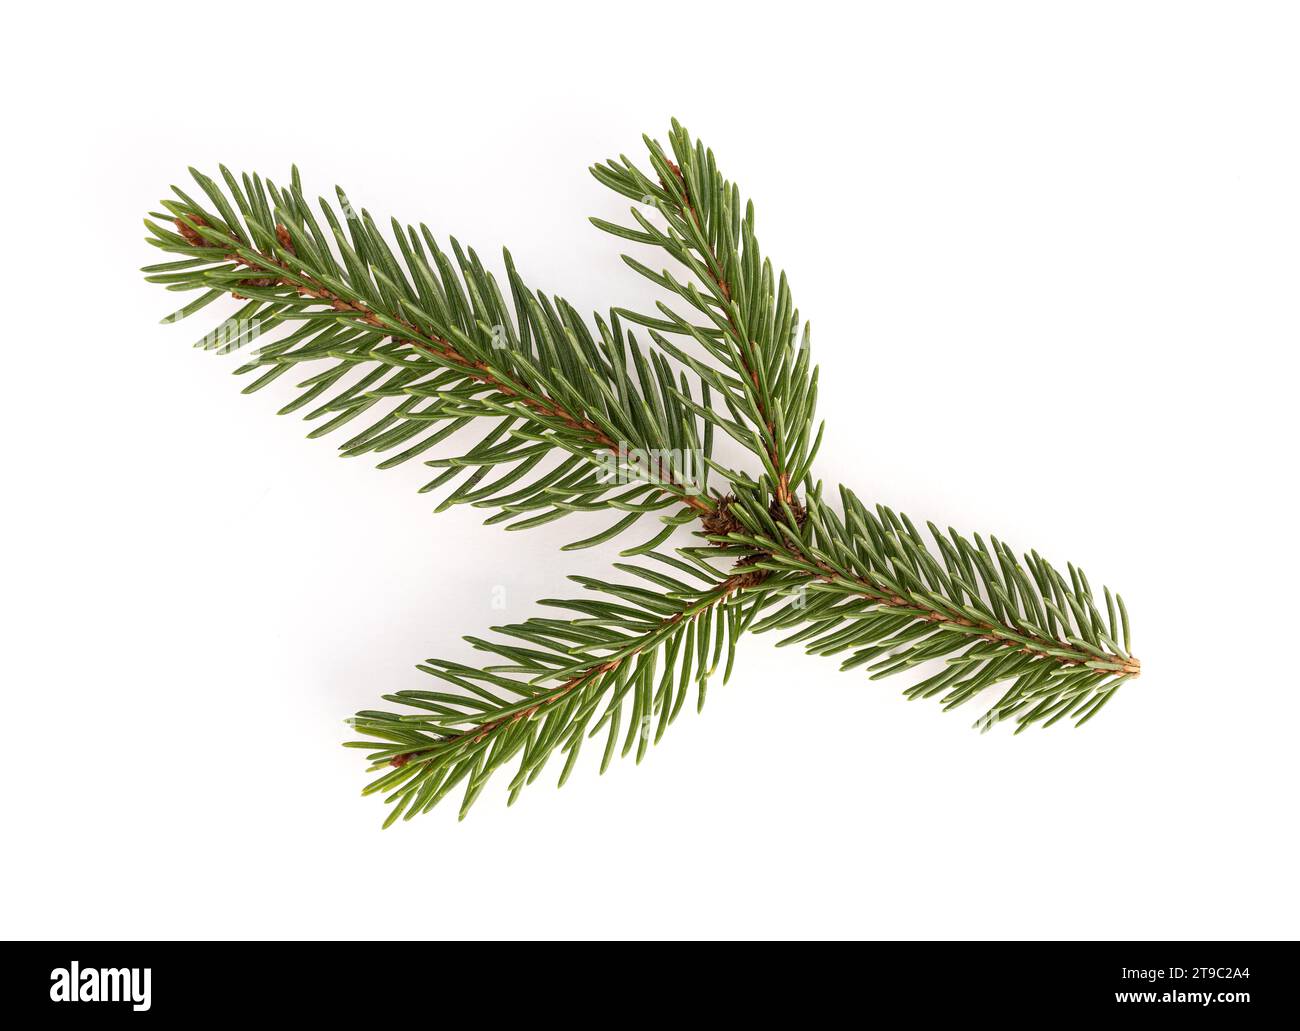 Picea abies or european spruce twig isolated on white background Stock Photo